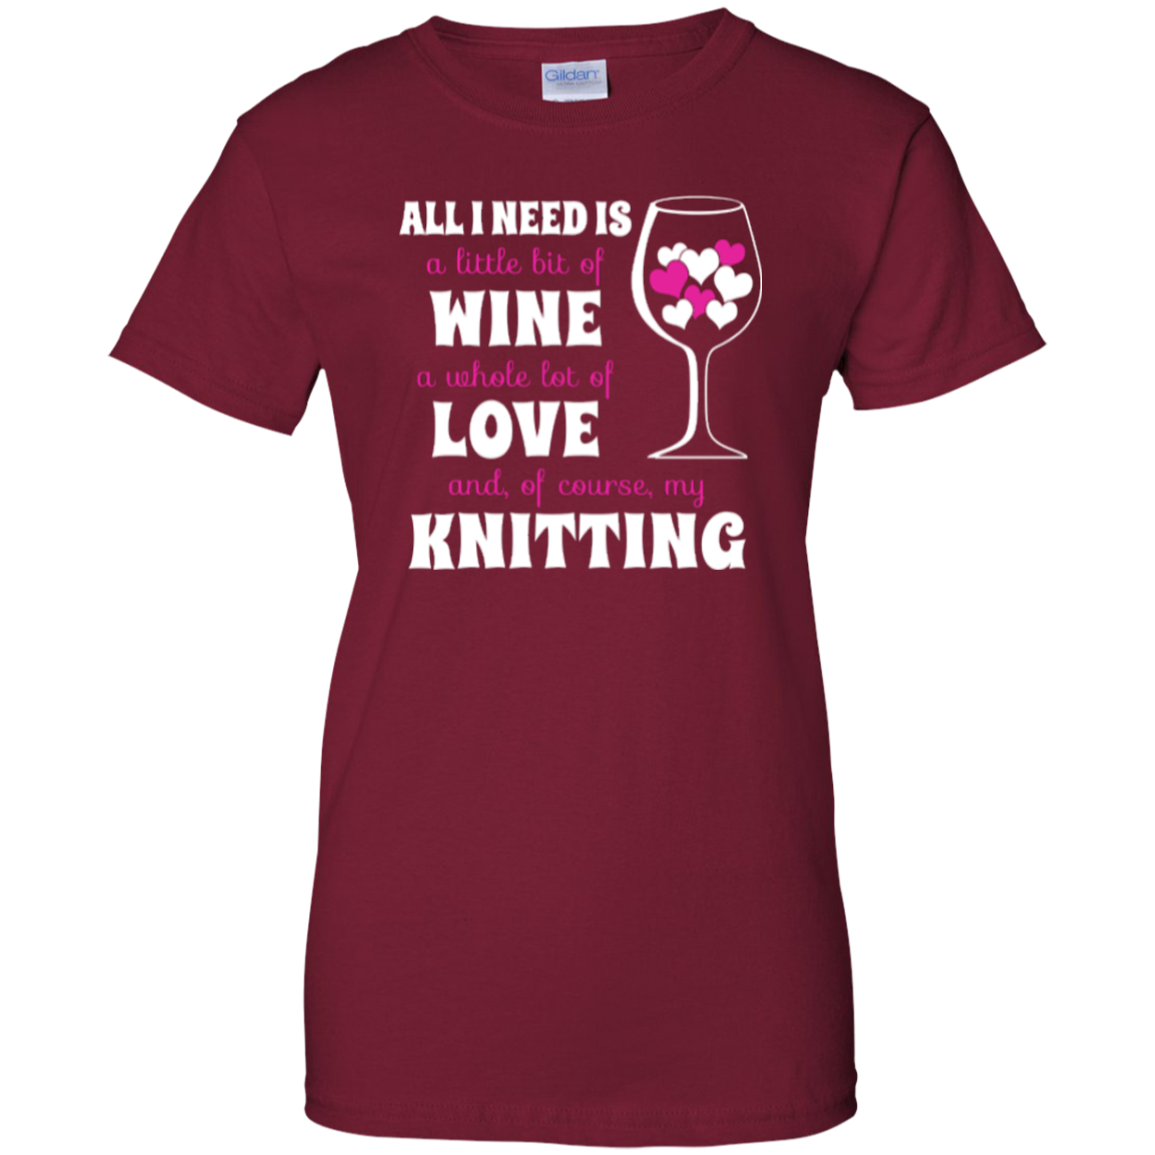 All I Need is Wine-Love-Knitting Ladies Custom 100% Cotton T-Shirt - Crafter4Life - 3